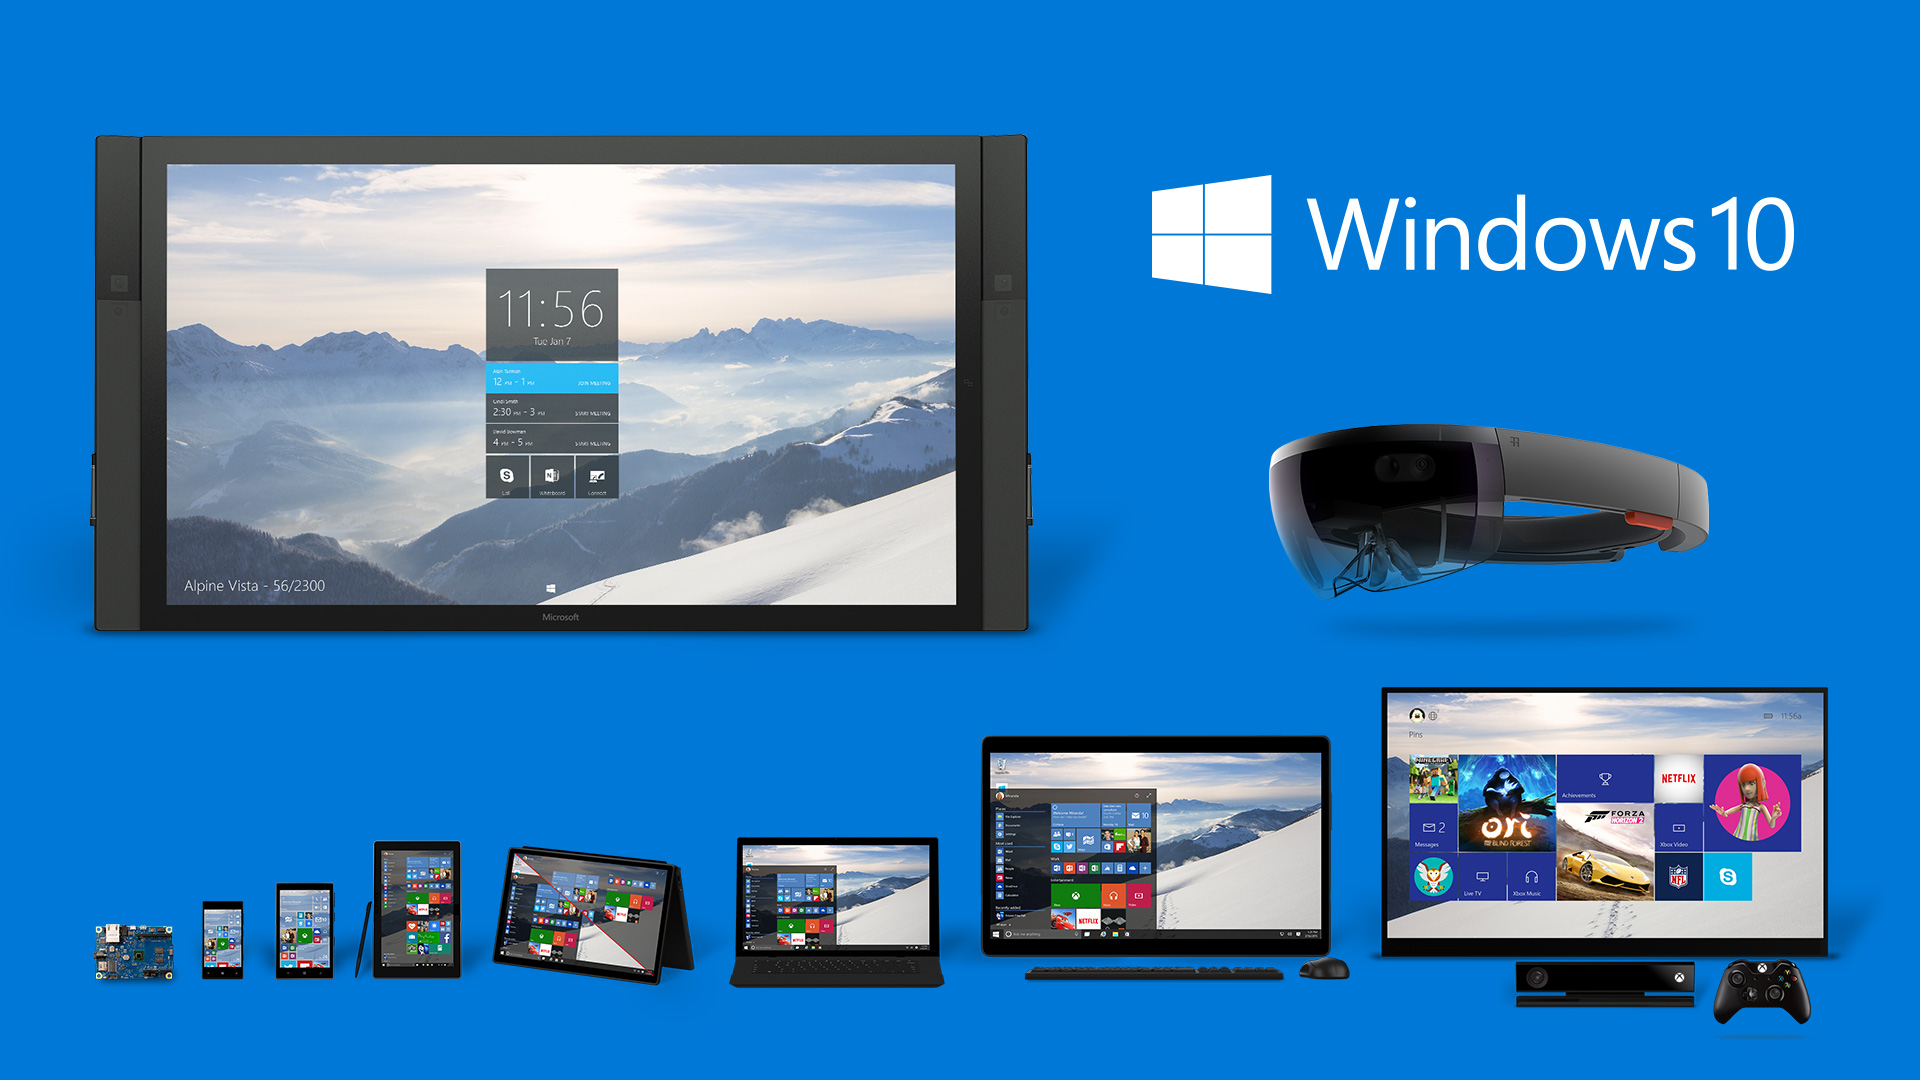 From this Friday the free Windows 10 update will stop